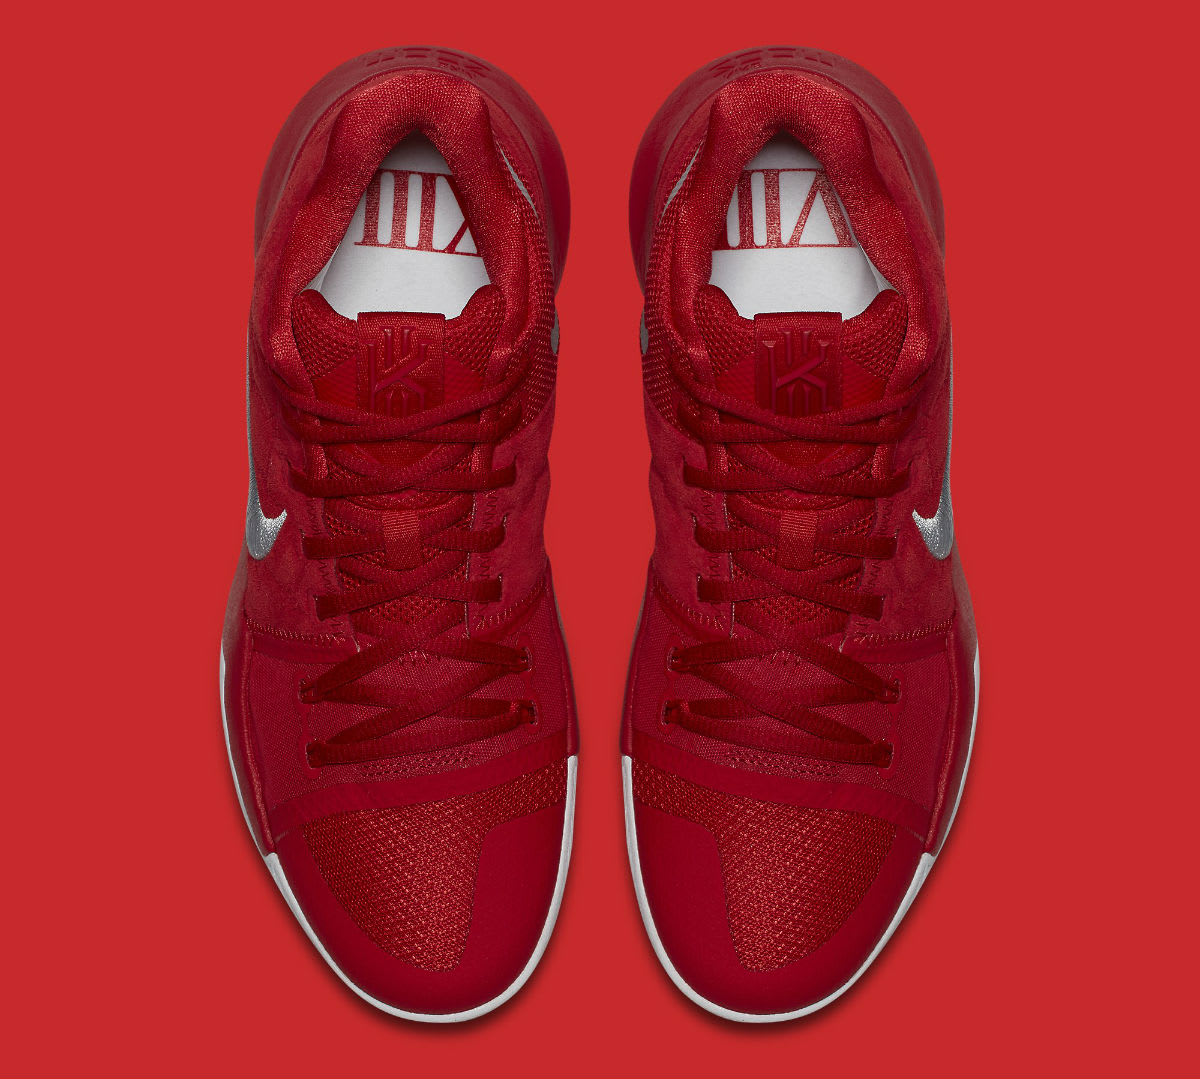 Nike Kyrie 3 University Red Release Date Top 852395-601